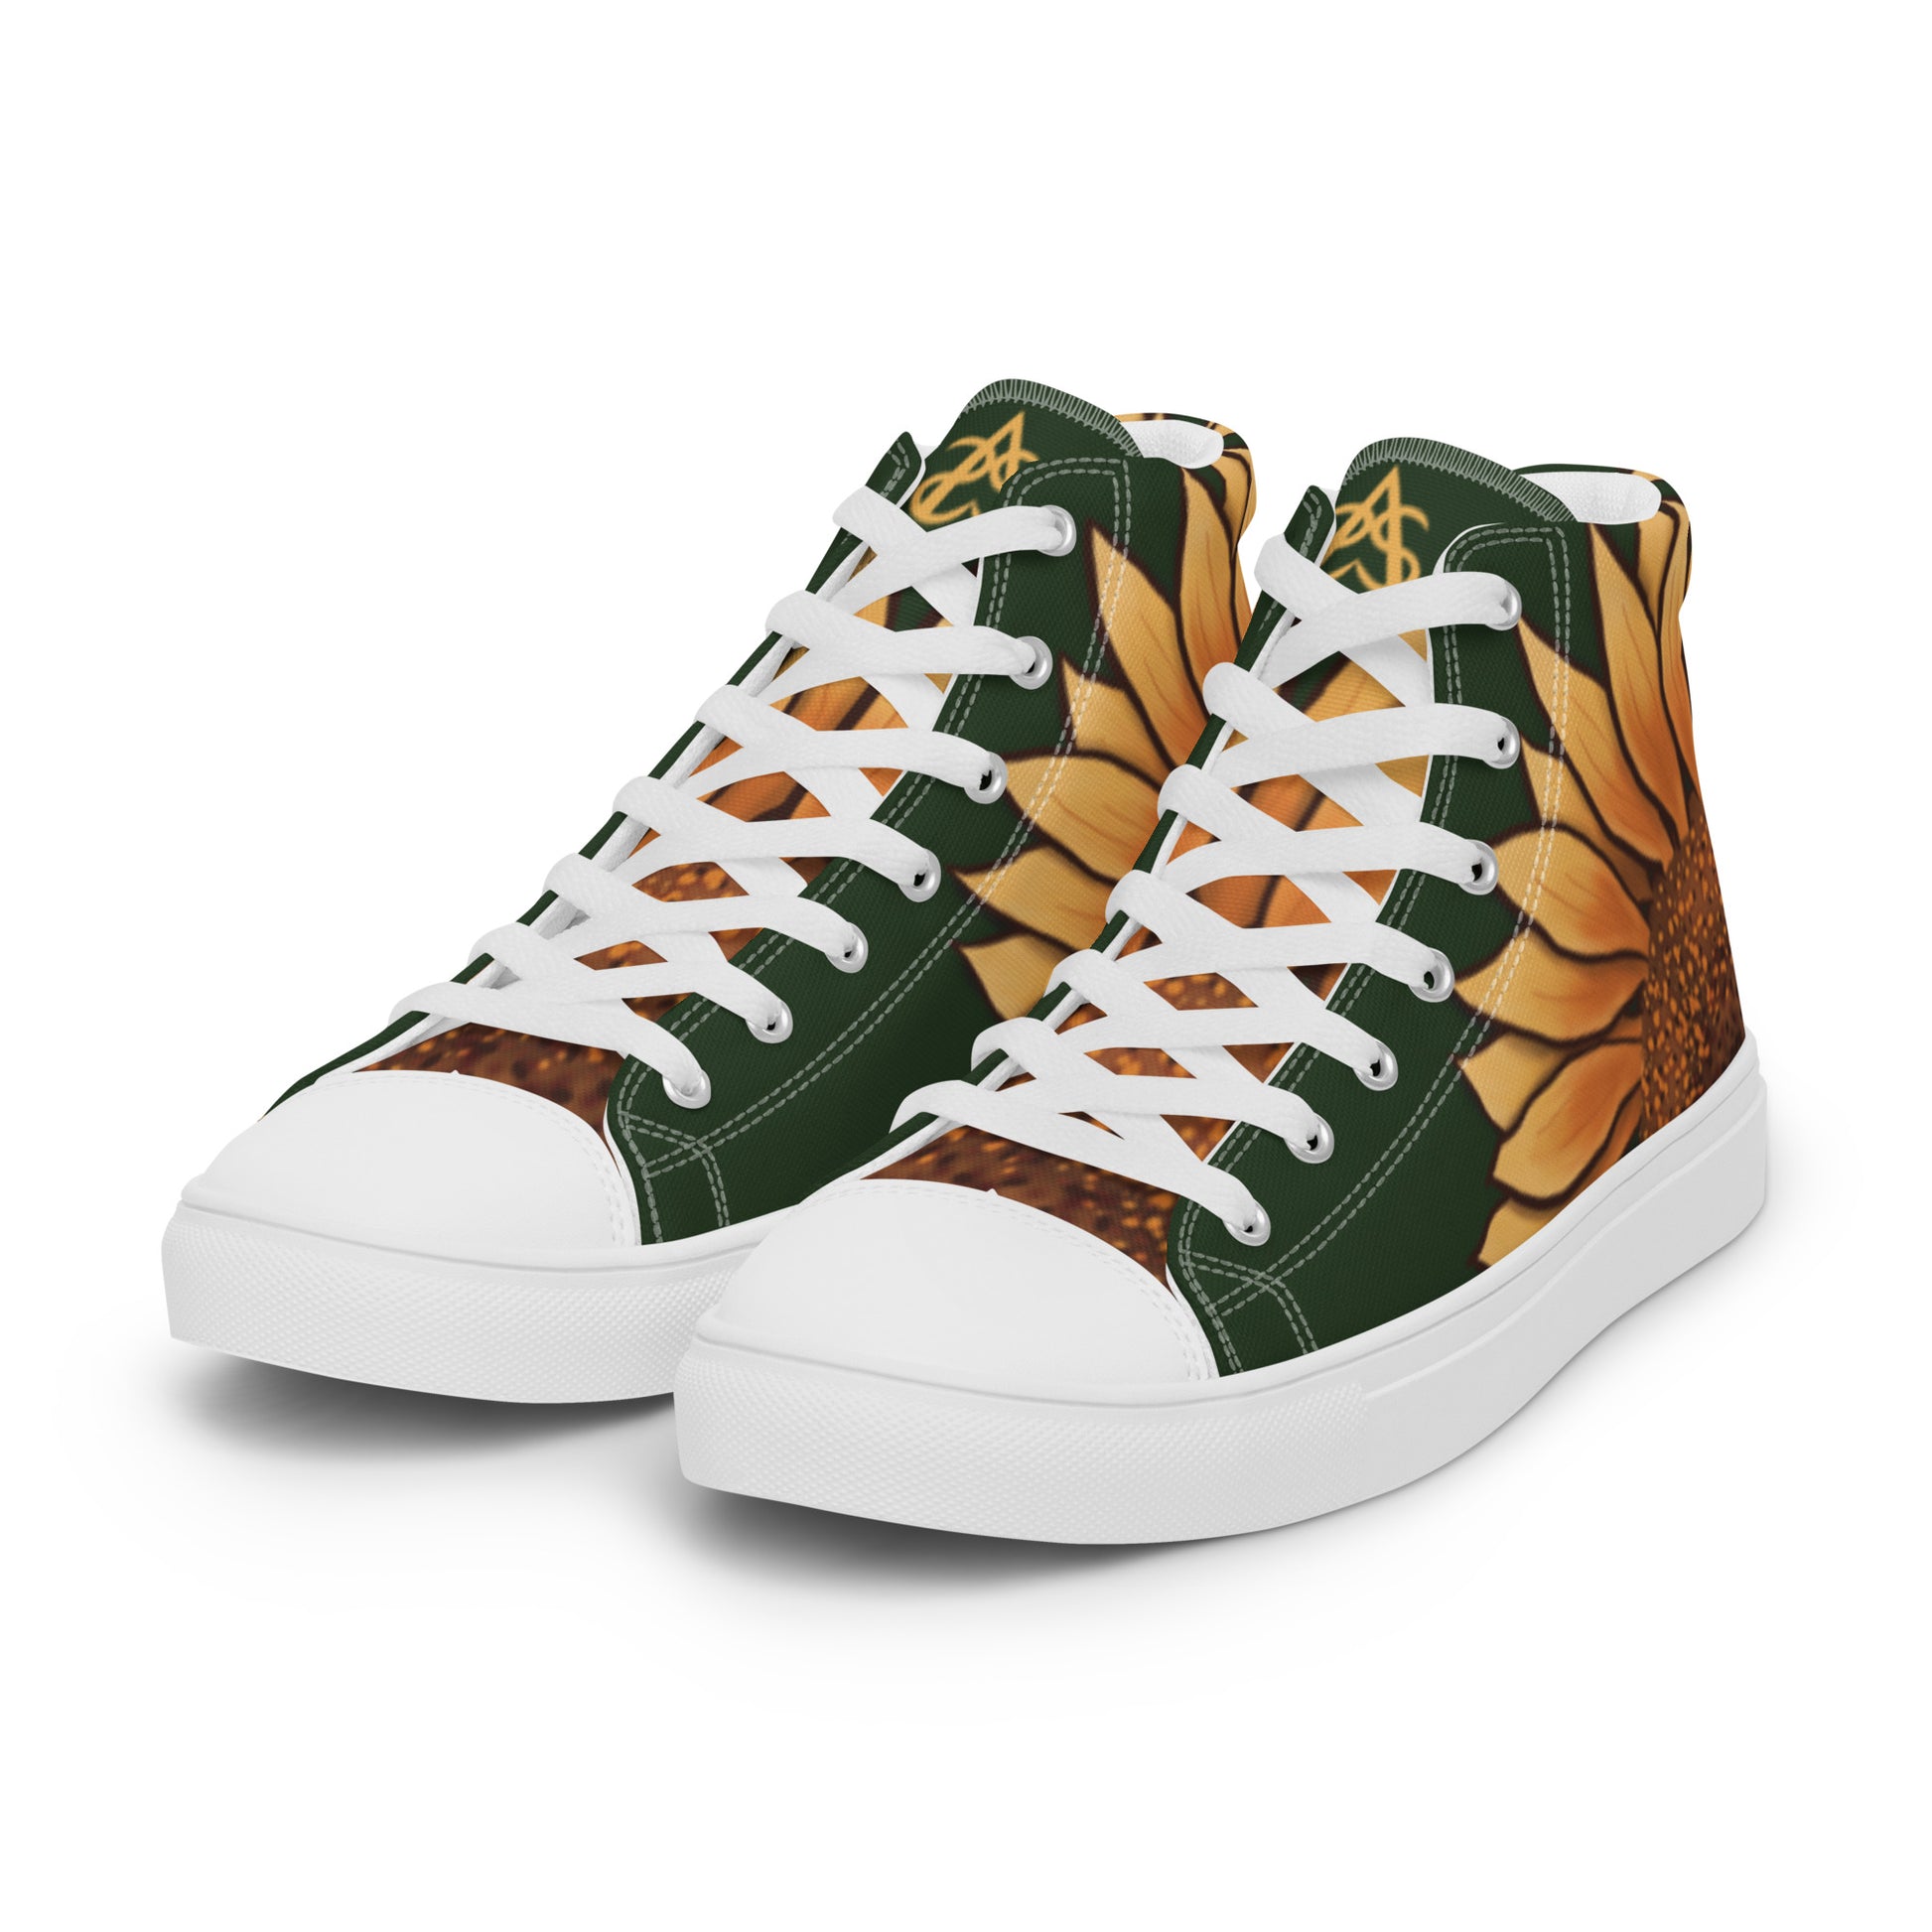 Left front view: a pair of high top shoes with a large sunflower on the heel and a forest green background.